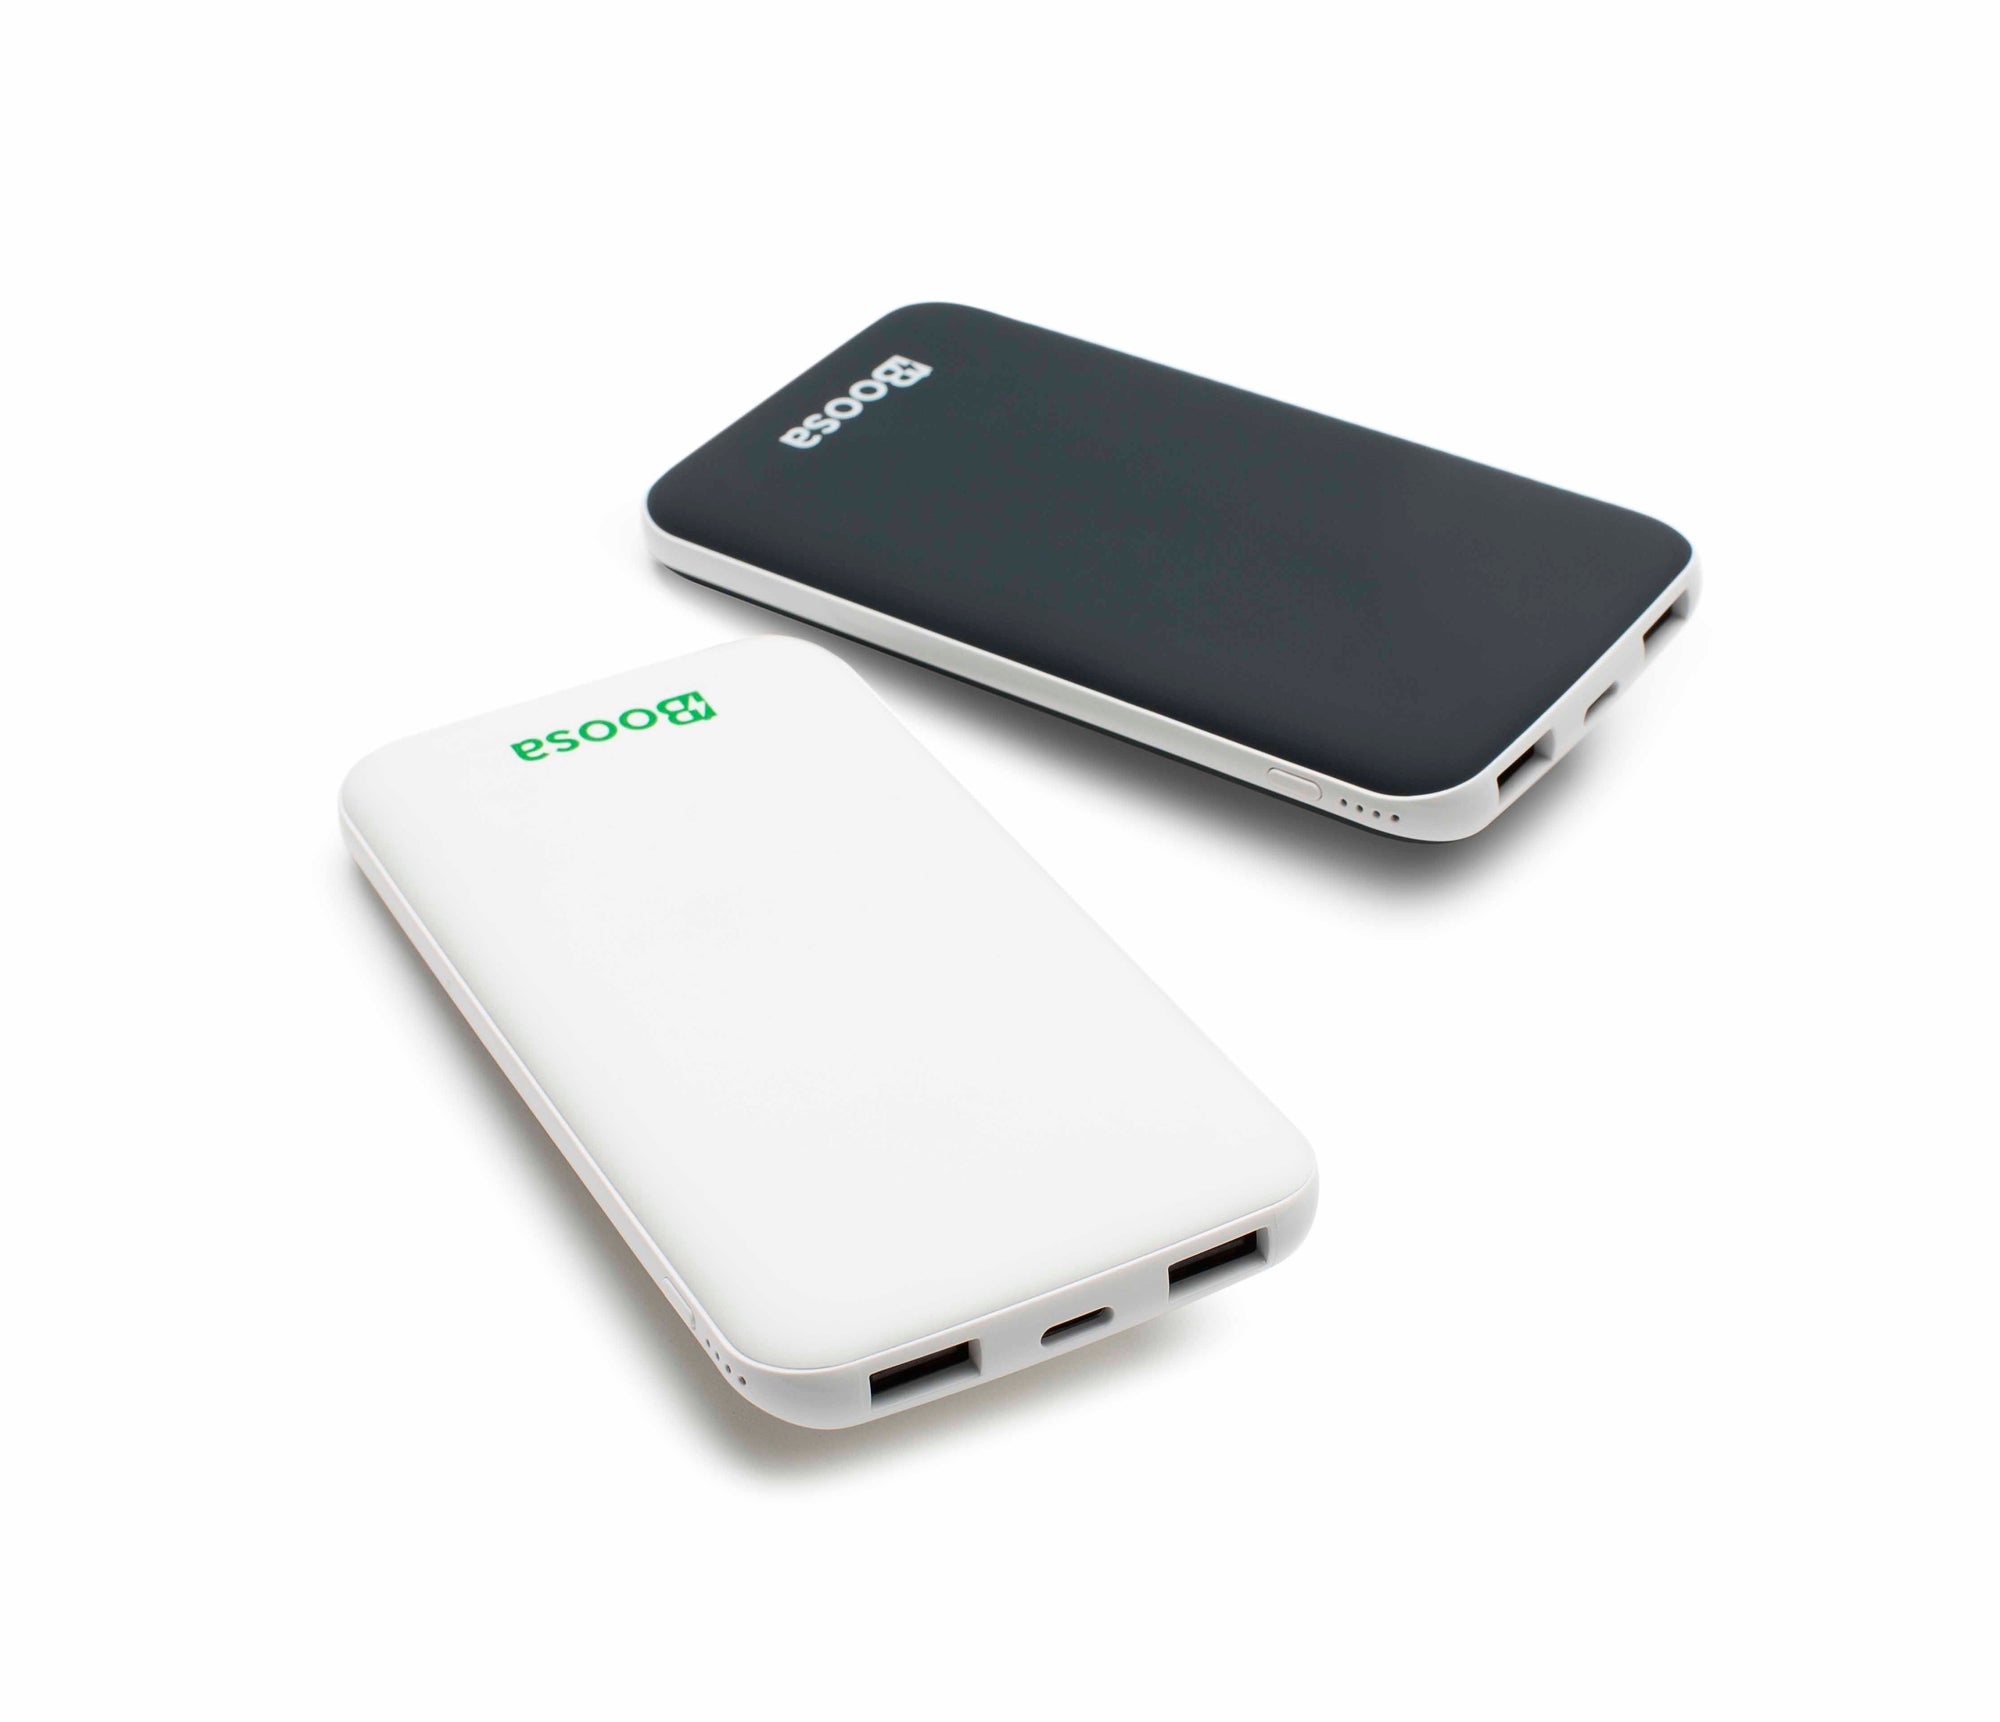 Boosa Macro™ Power Bank - Fast 10000mAh USB-C Portable Phone Charger for iPhone and Android